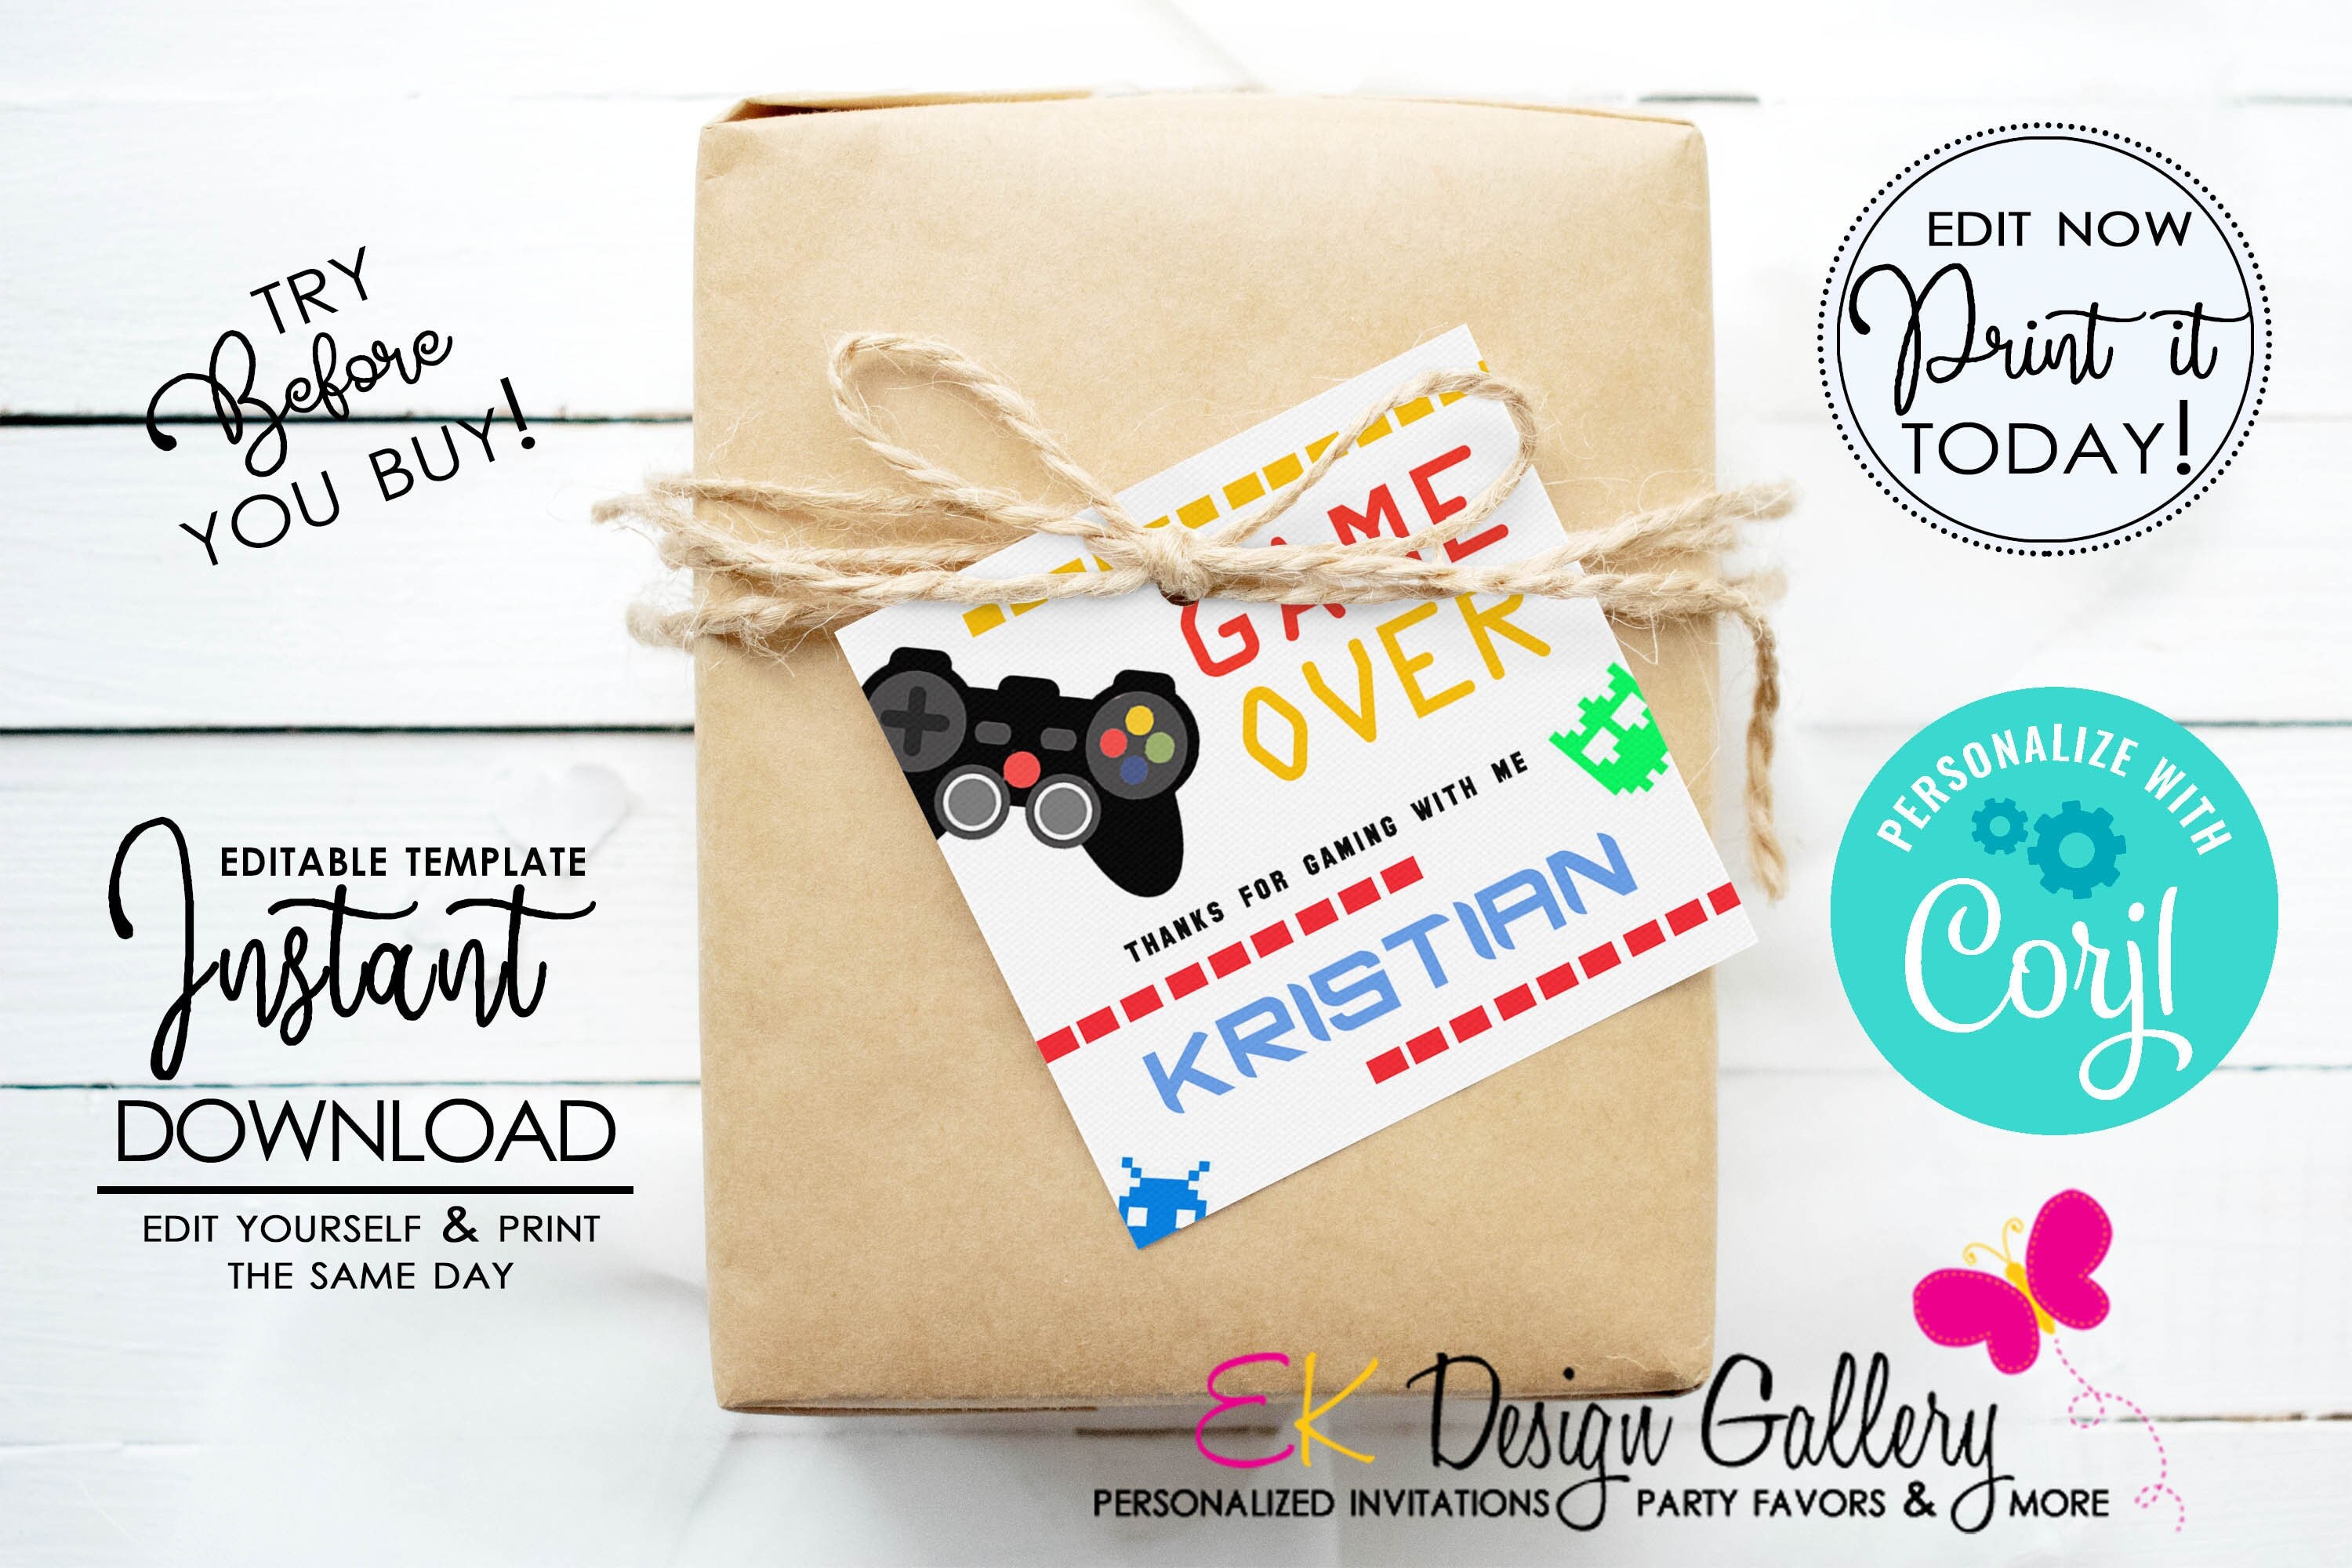 Gamer Birthday Party Favor Tag Template Online Gaming Loot 